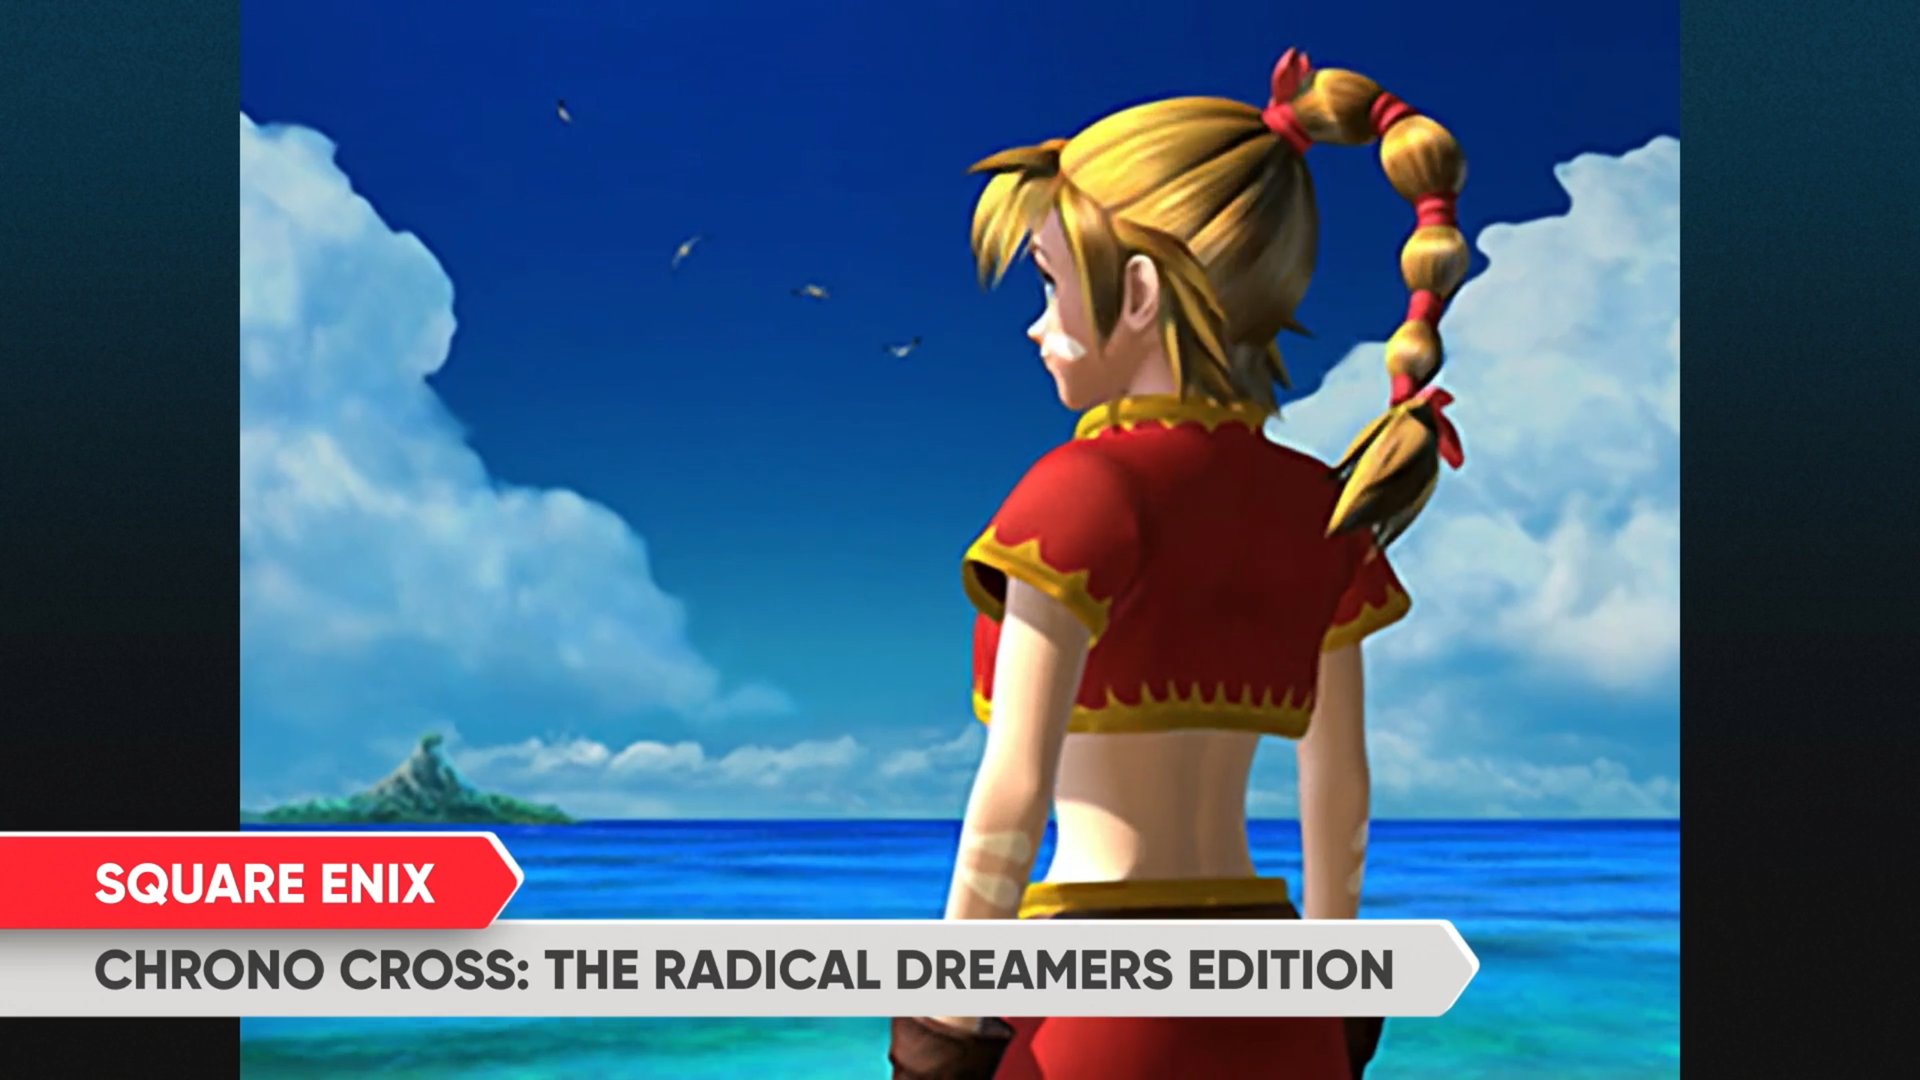 News - Analysis - Review - Chrono Cross: The Radical Dreamers Edition, Review Thread